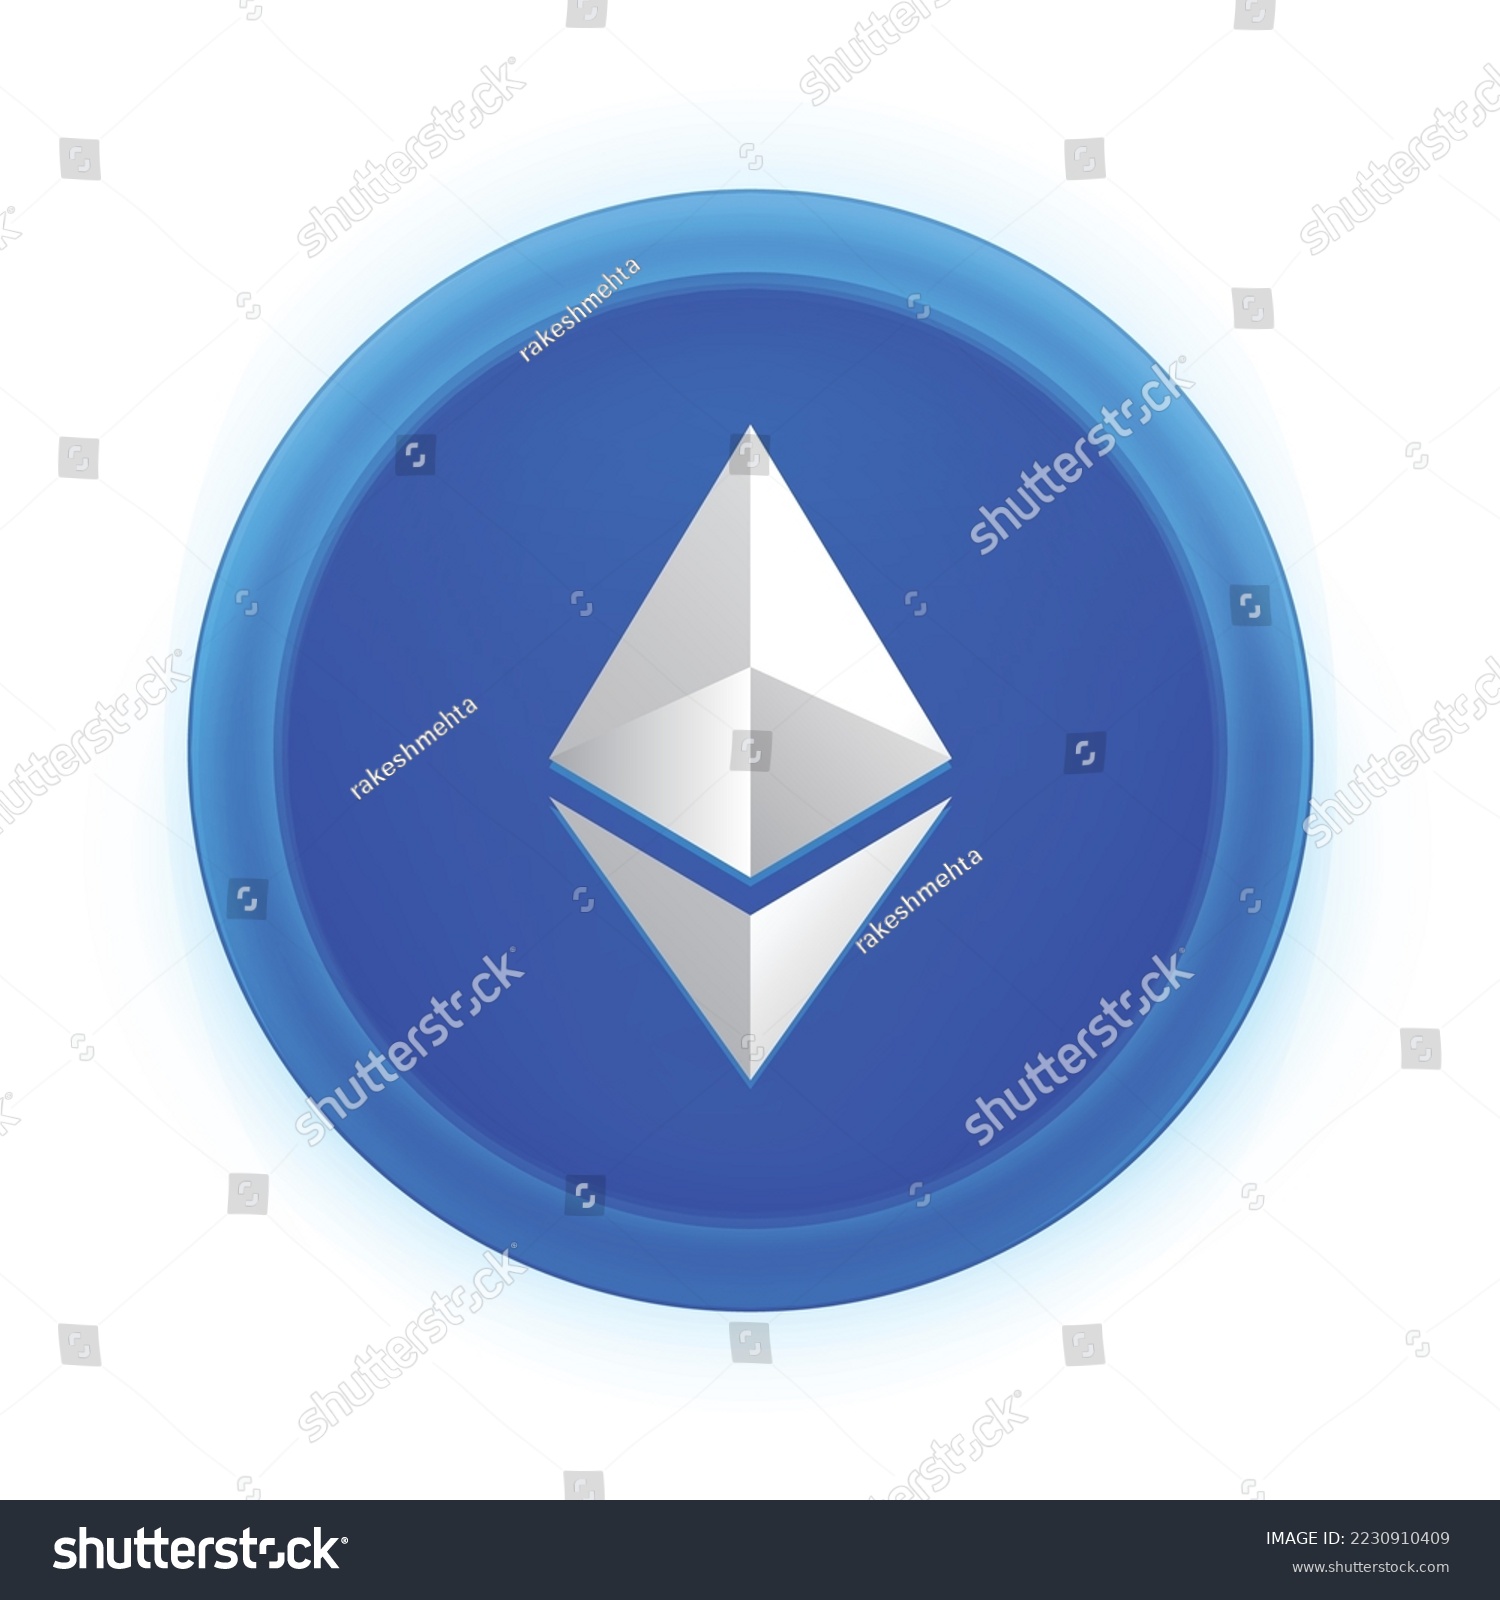 SVG of Ethereum (ETH)  crypto logo isolated on white background. ETH Cryptocurrency coin token vector  svg